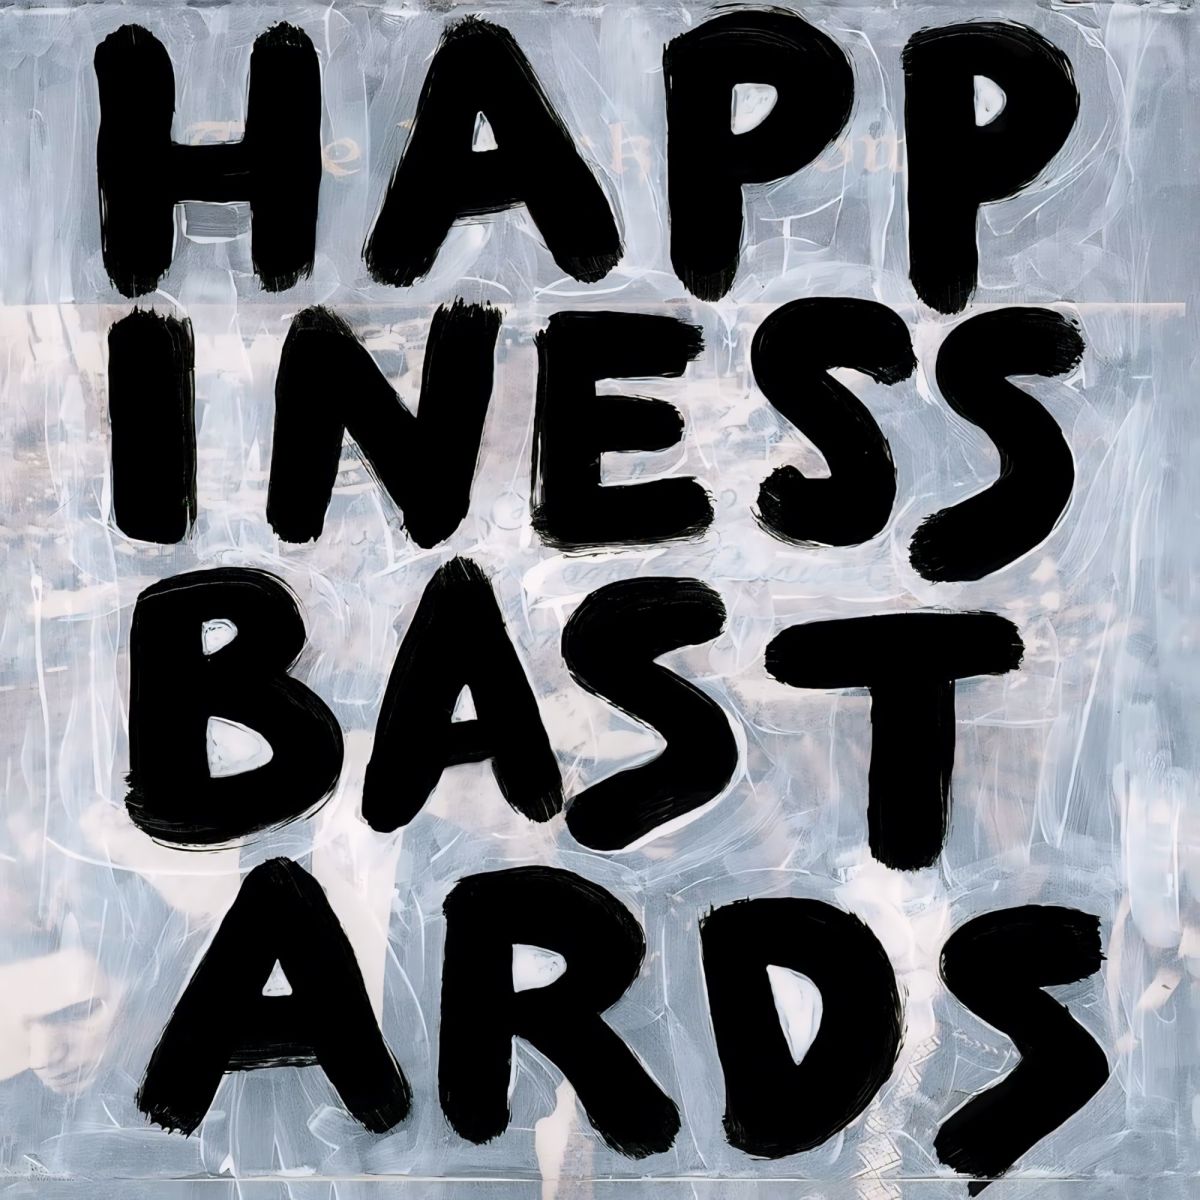 The Black Crowes’ ‘Happiness Bastards’ Marks a New Beginning for the Band | Album Review